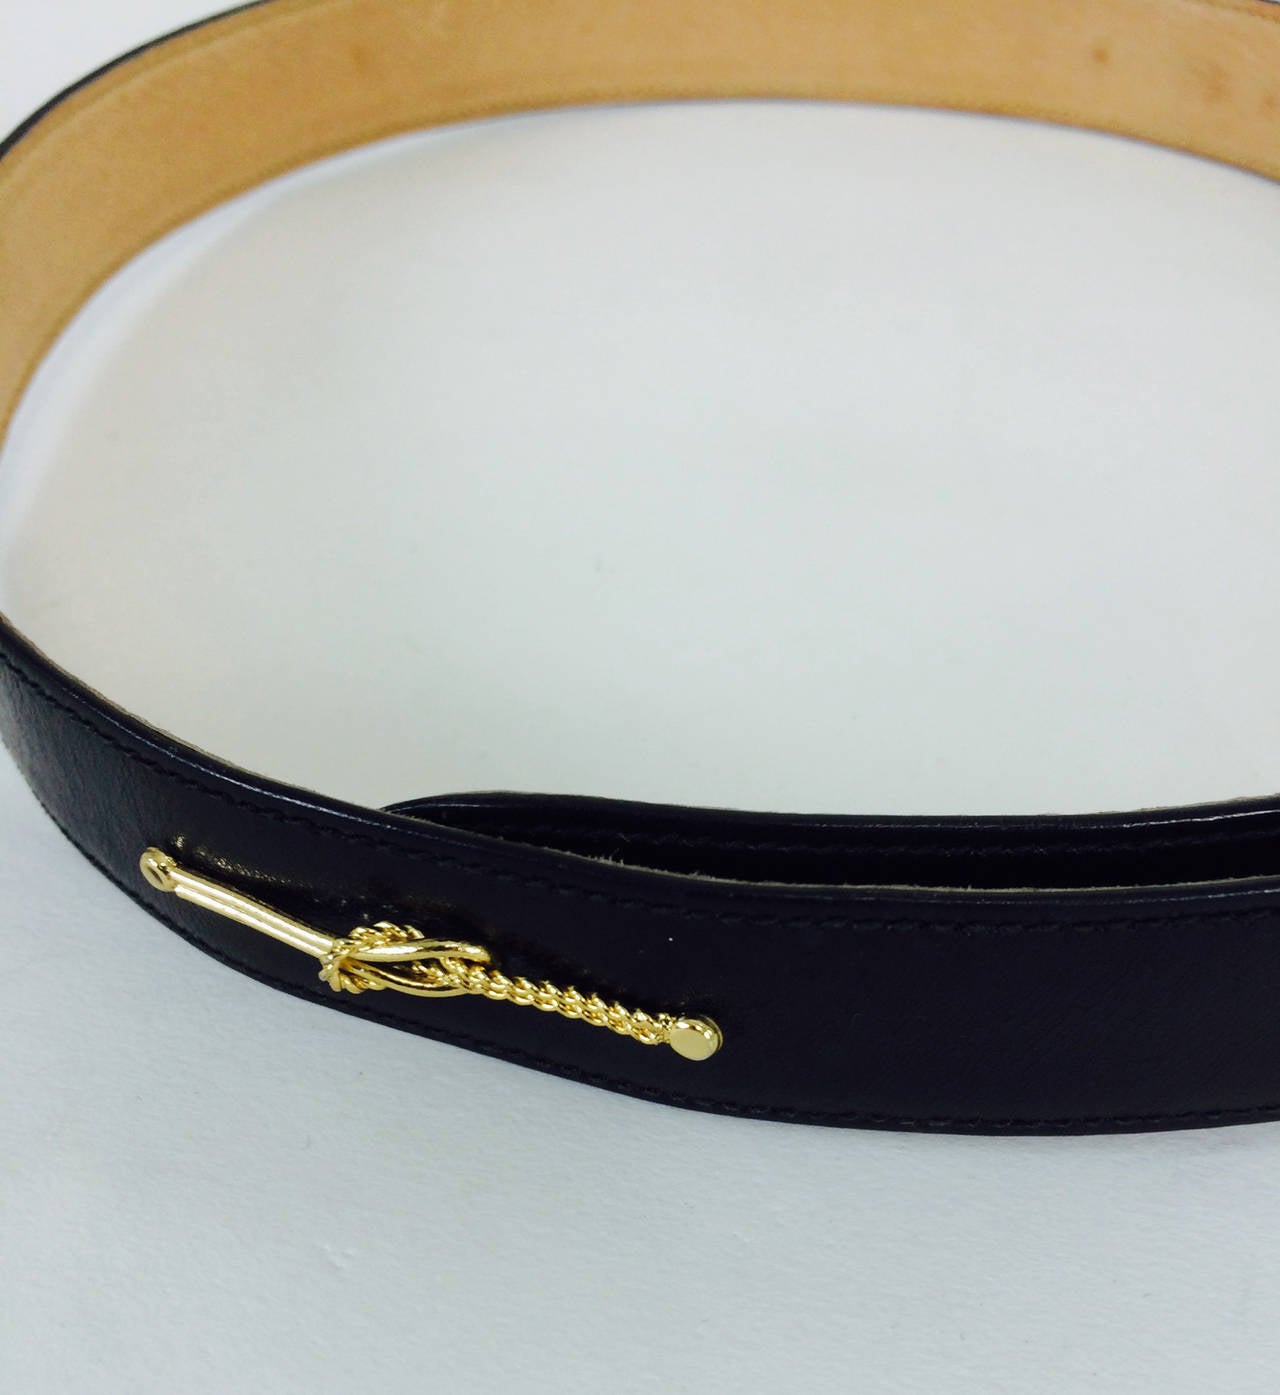 Women's Gucci black box calf leather belt with gold harness appliques 28